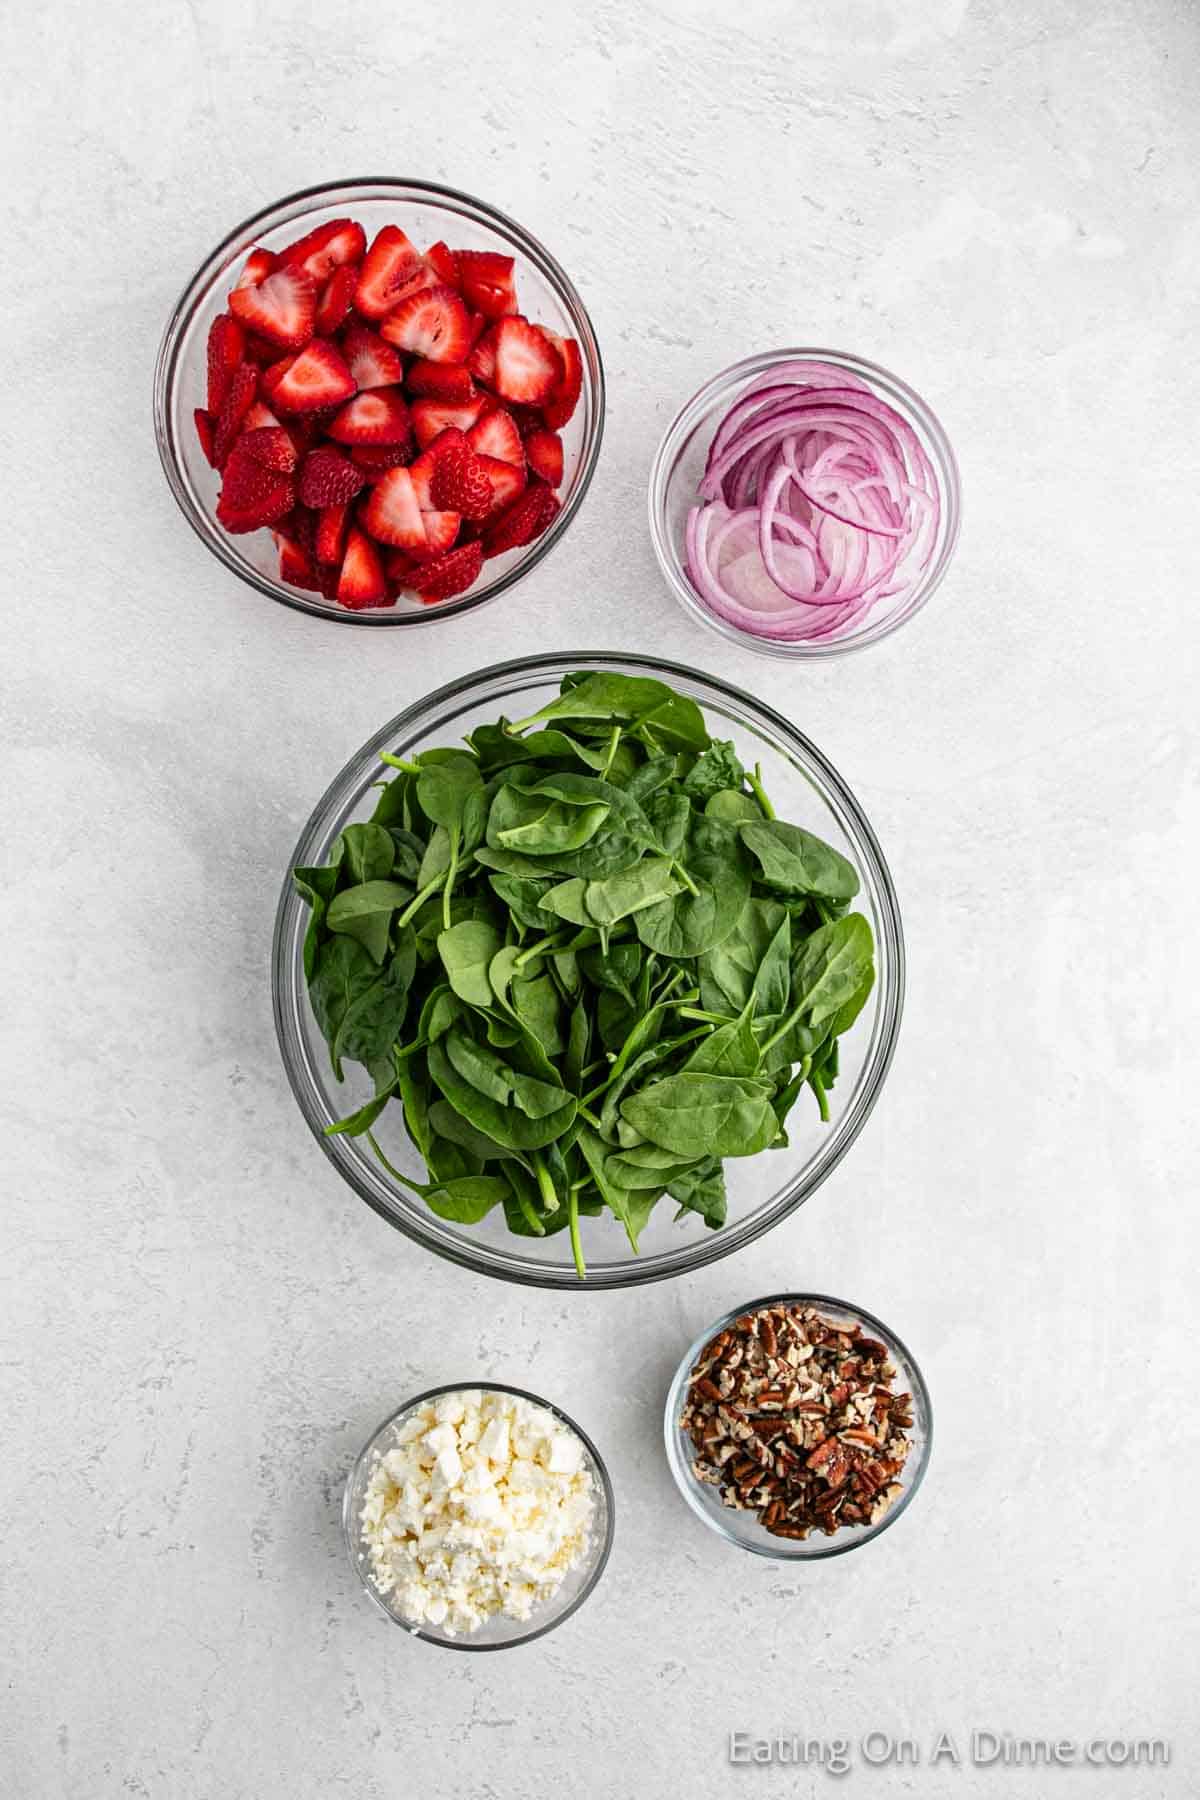 Slice strawberries, fresh spinach, red onions, chopped pecans and blue cheese crumbles